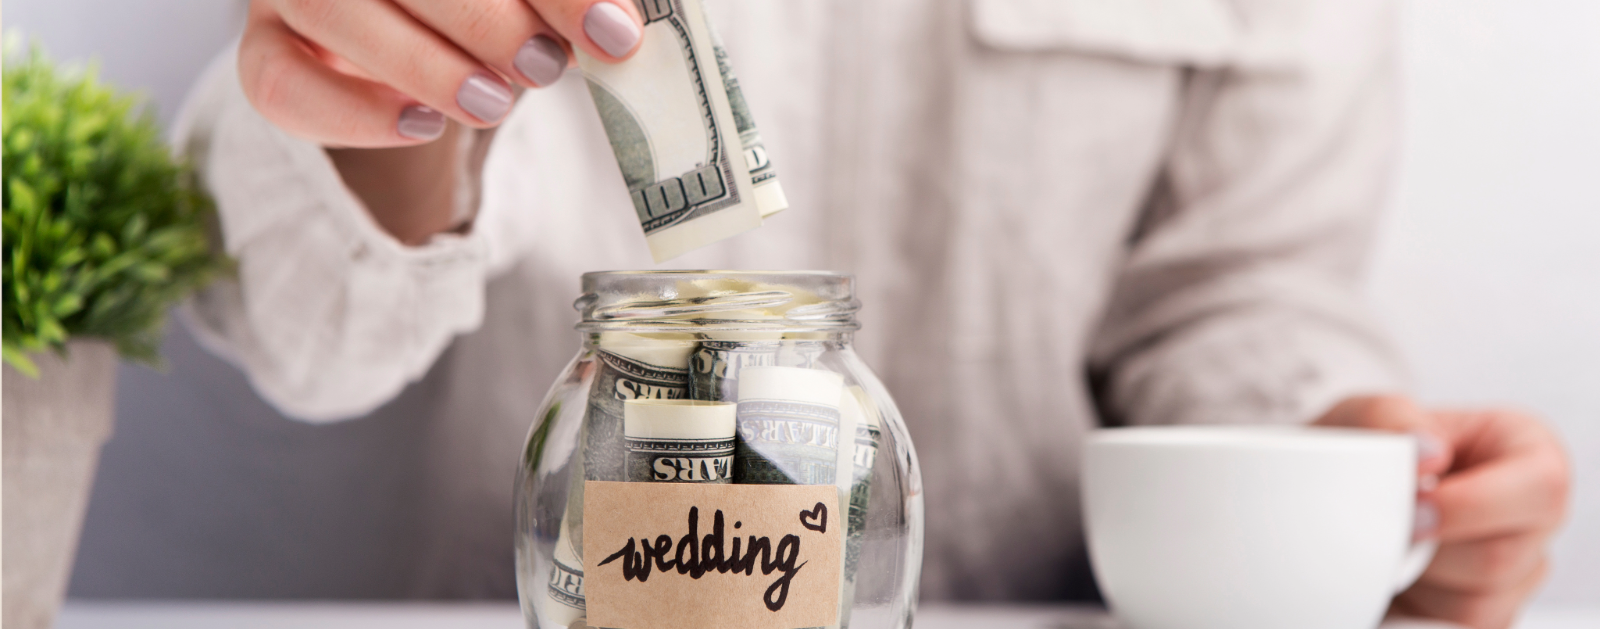 Woman's hand putting a one hundred dollar bill into a glass jar of money with the label Wedding on it.